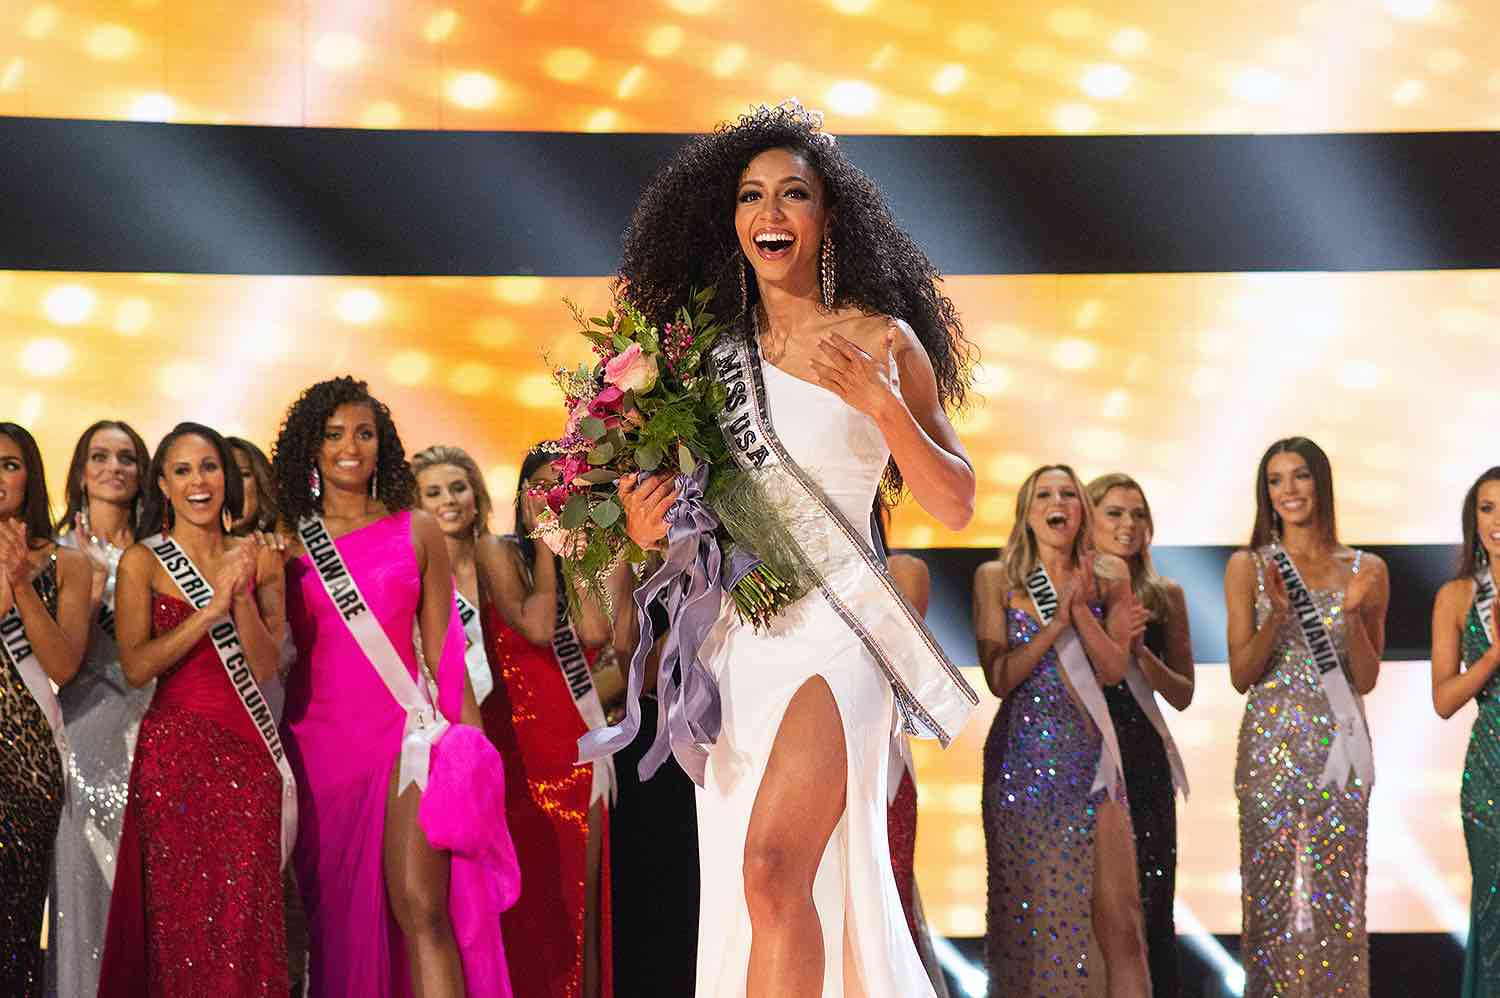 Why is Miss USA still a thing in 2020? Should it be canceled? Here are some thoughts about pageants in today’s society.